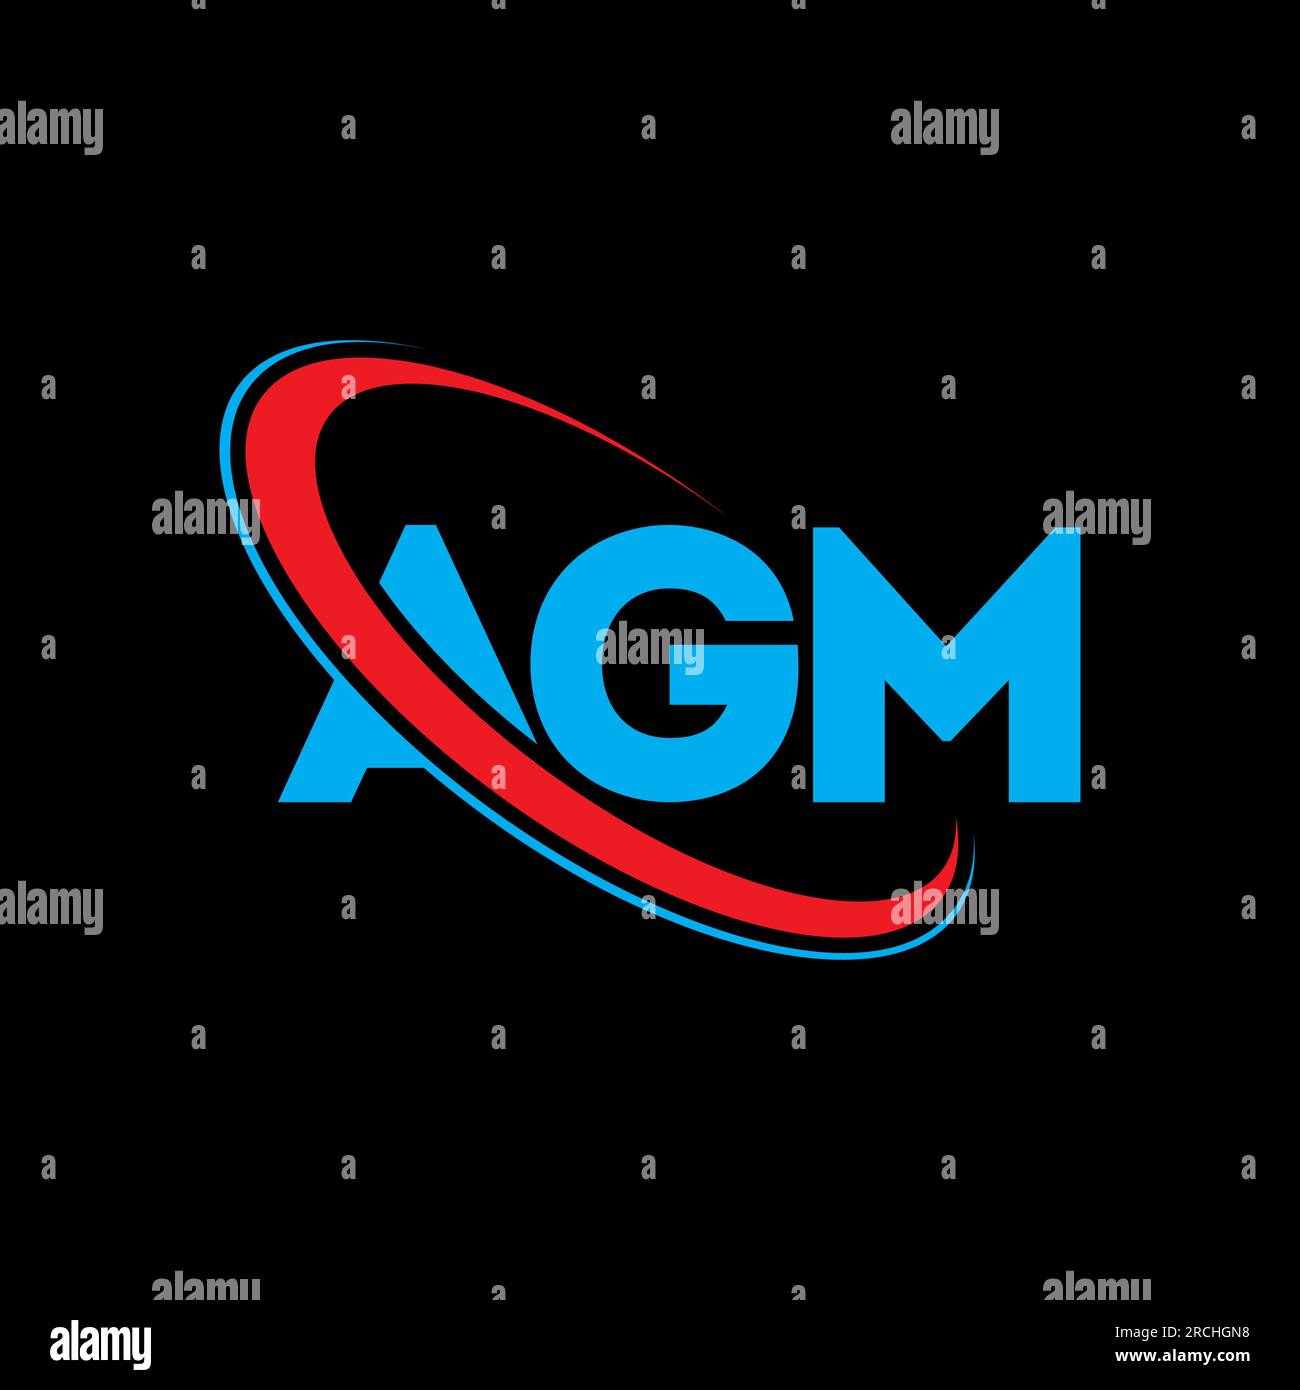 AGM logo. AGM letter. AGM letter logo design. Initials AGM logo linked with circle and uppercase monogram logo. AGM typography for technology, busines Stock Vector